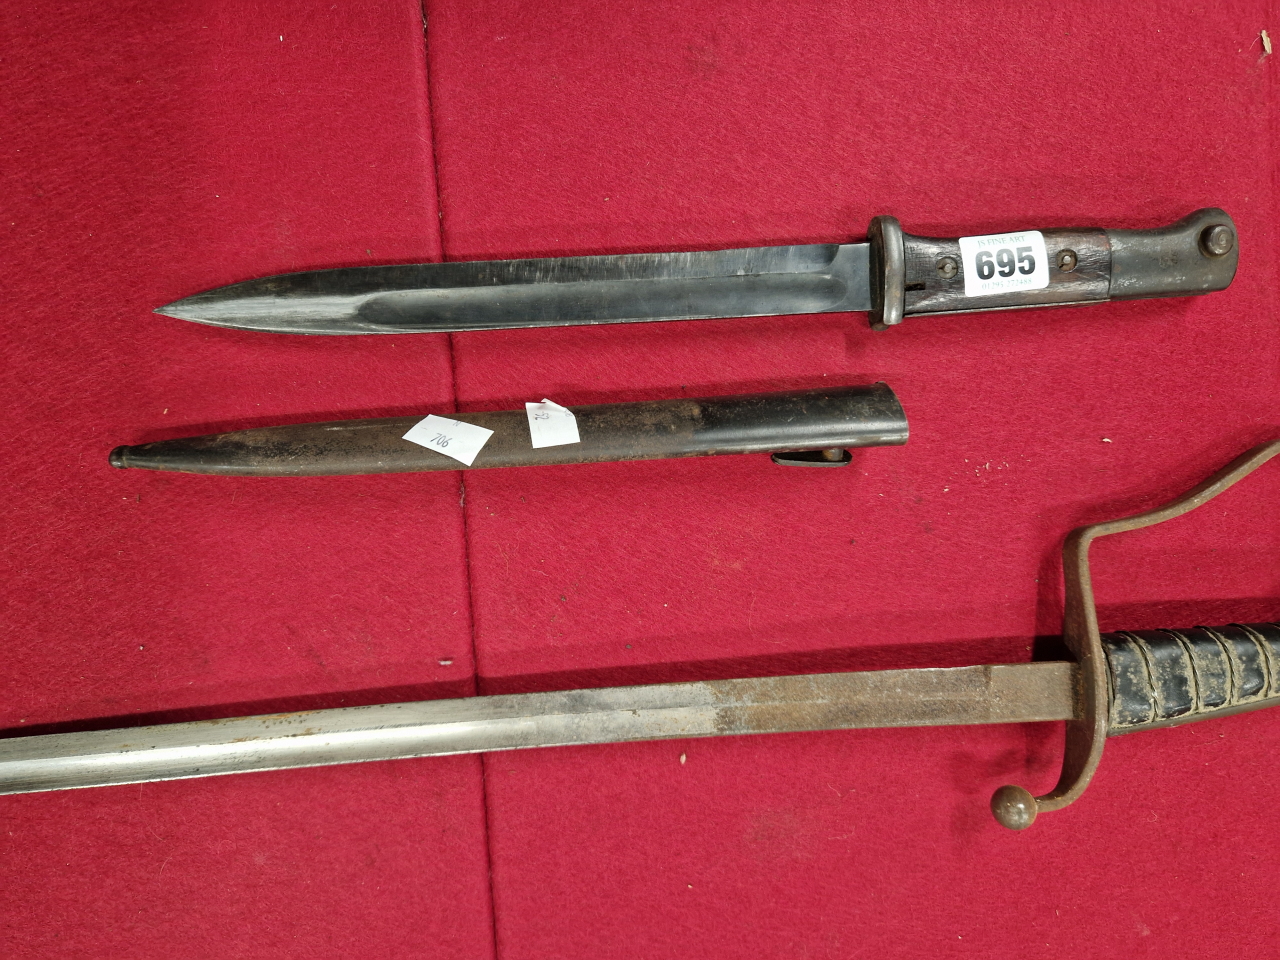 A WW I MAUSER BAYONET TOGETHER WITH GERMAN? DRESS SWORD AND AN ASSOCIATED SCABBARD. - Image 2 of 4